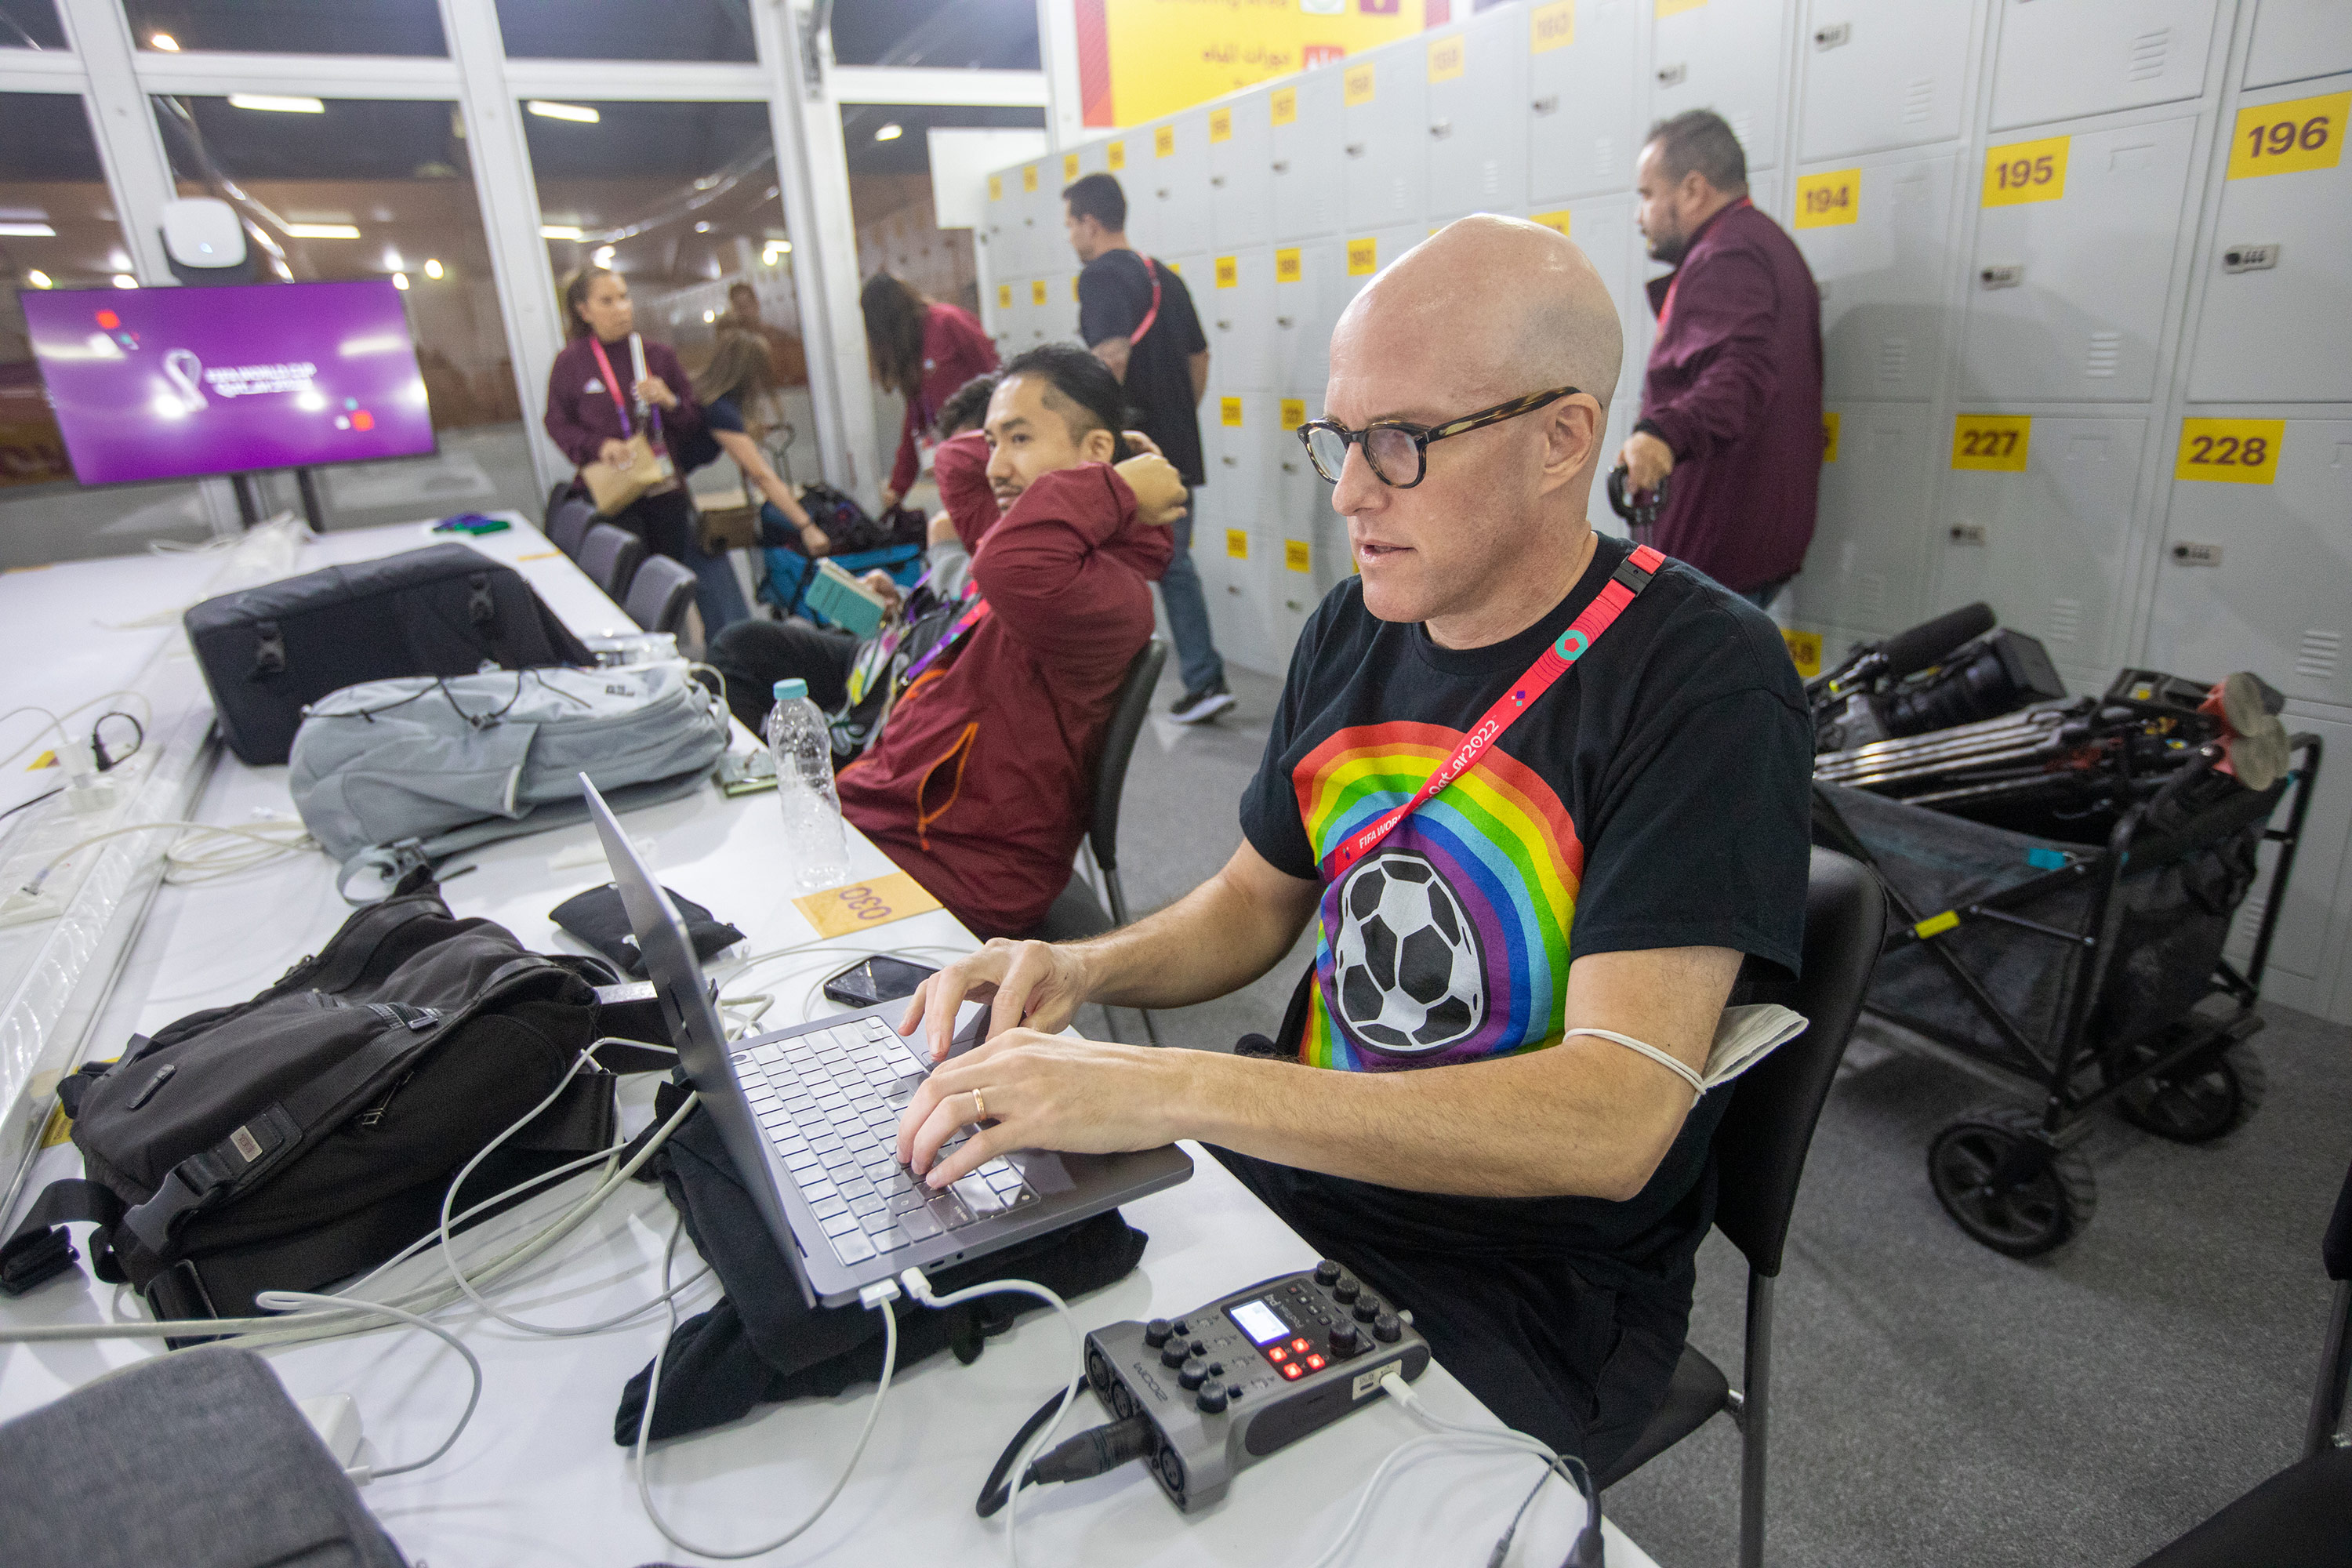 Wahl, right, works in the FIFA Media Center before a World Cup match on November 21, in Al Rayyan, Qatar.